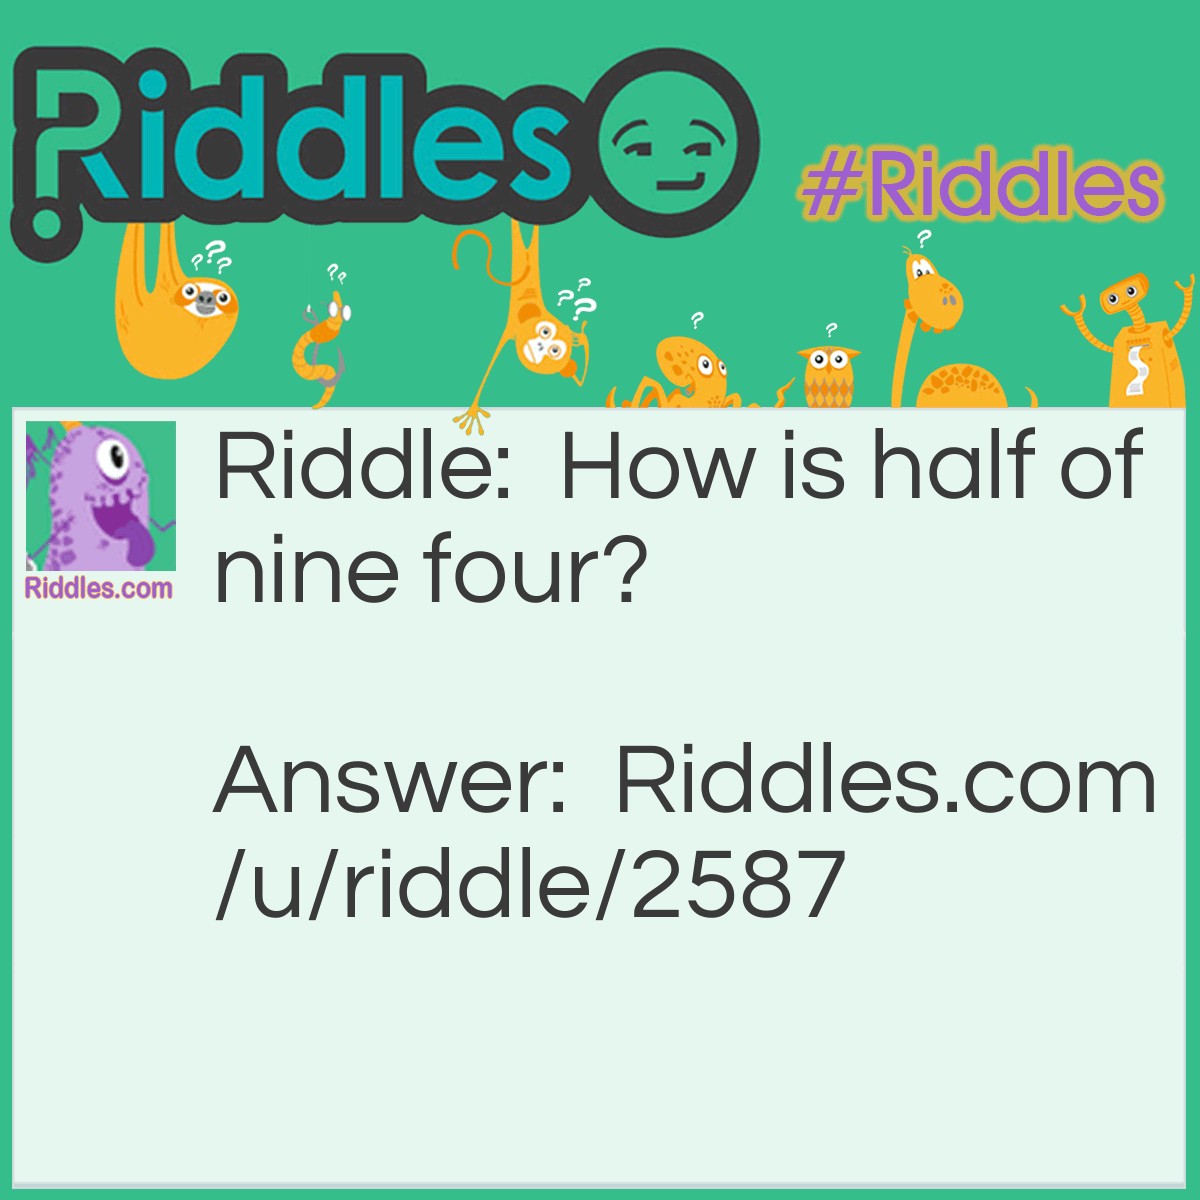 Riddle: How is half of nine four? Answer: In Roman Numerals, nine is IX and four is IV. If you take IX and cut it in half horizontally, you will get IV.